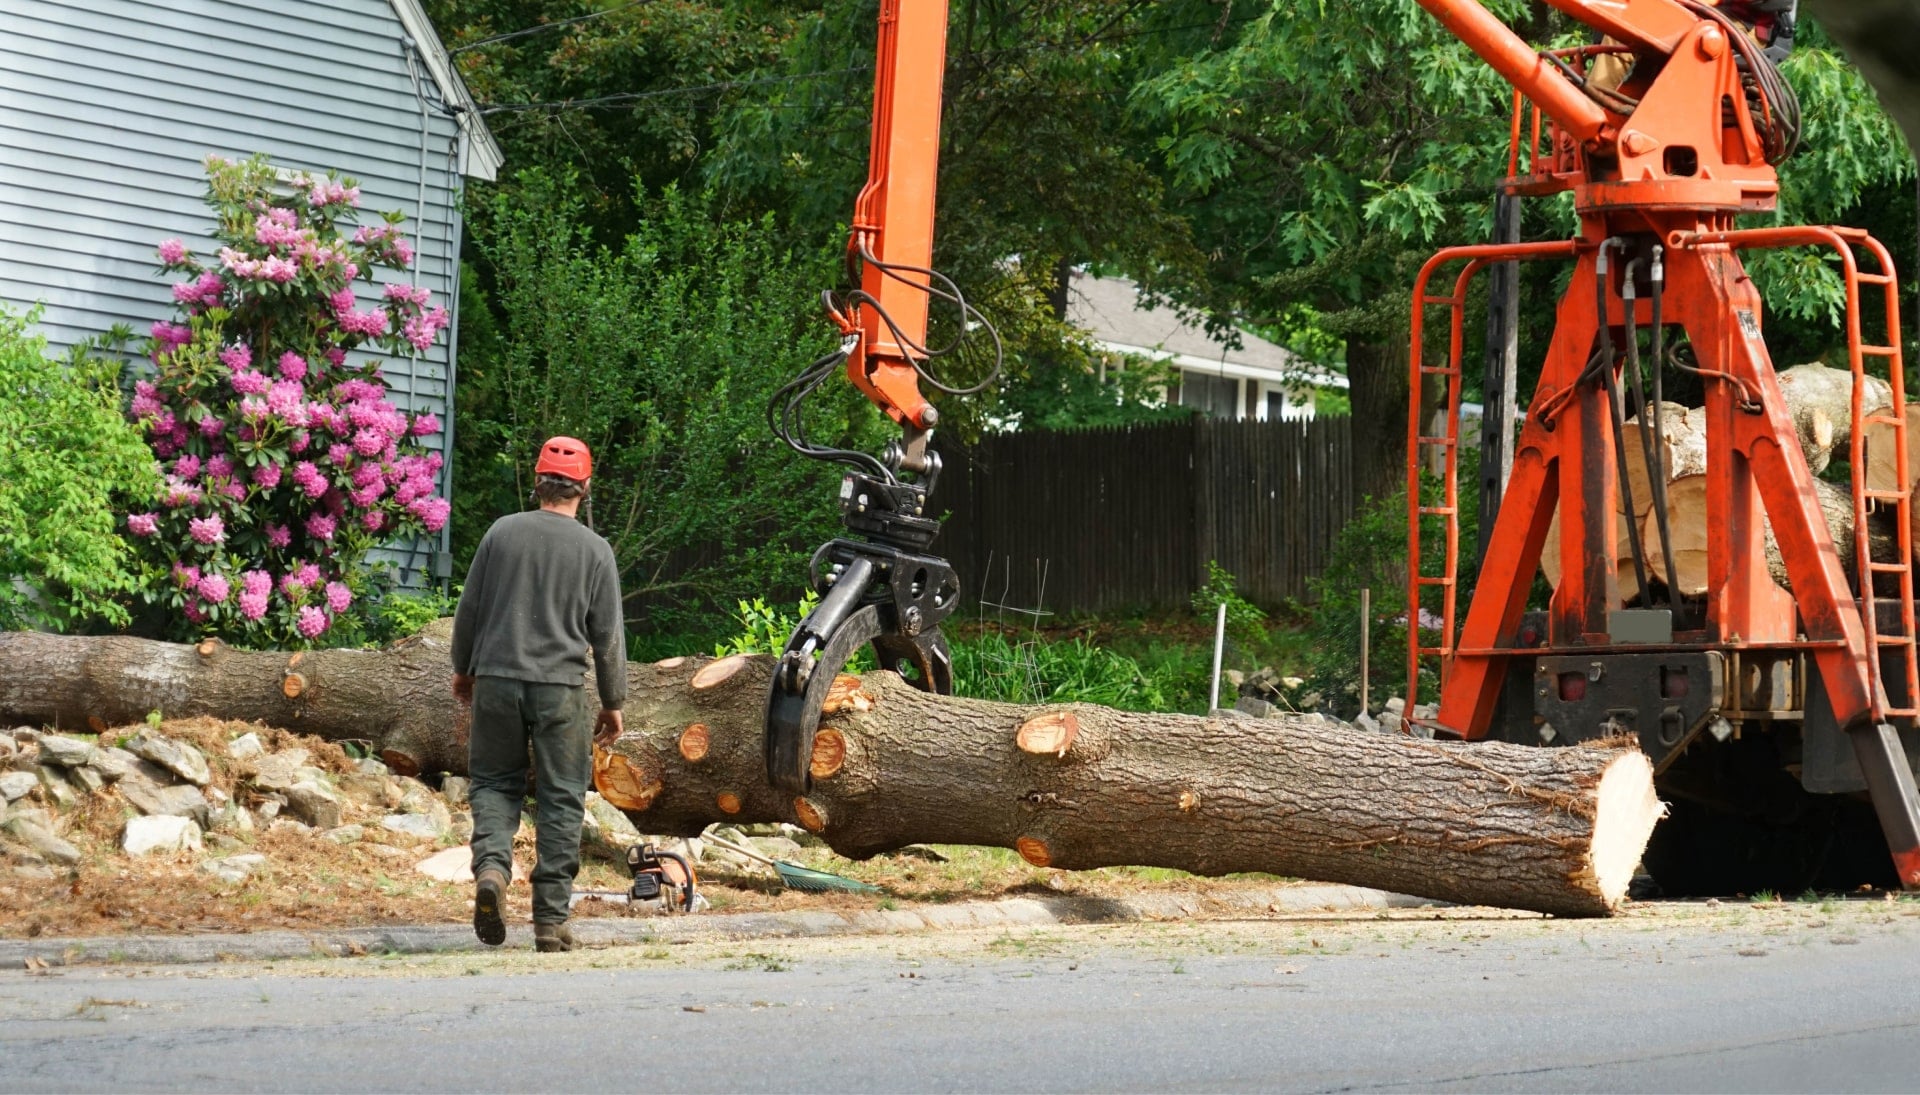 Local partner for Tree removal services in Missoula